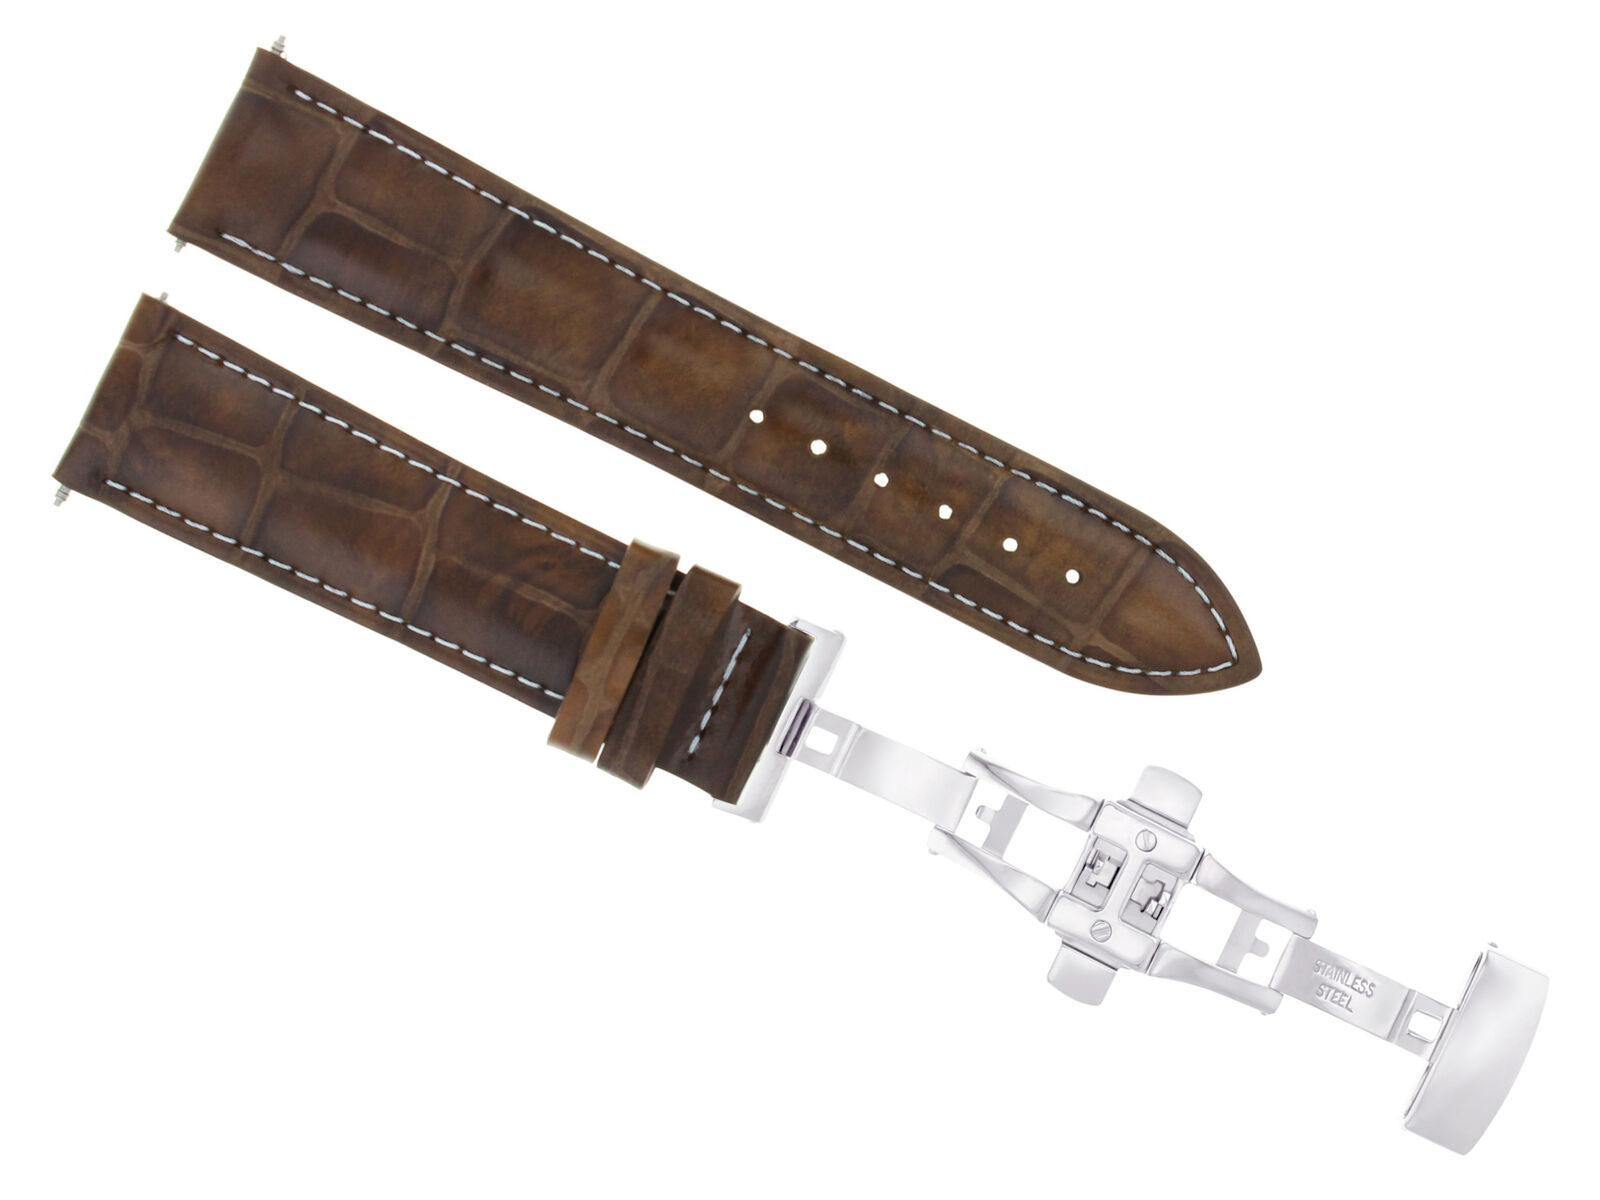 19MM/16MM LEATHER WATCH STRAP BAND FOR JAEGER LECOULTRE DEPLOY CLASP L/BROWN WS